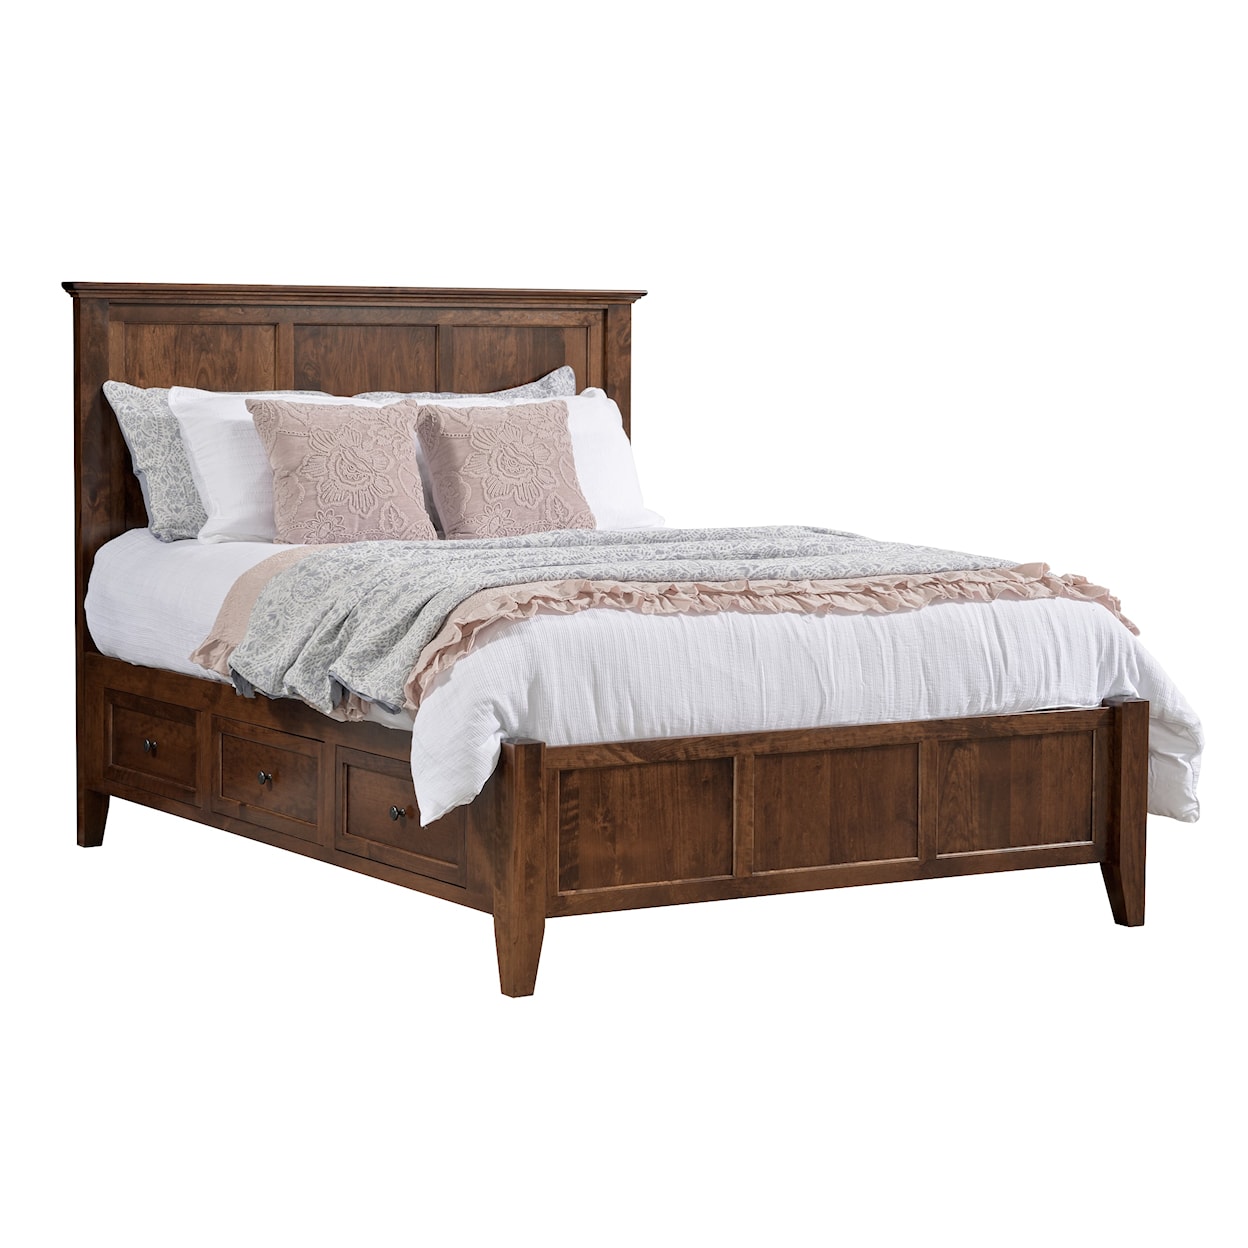 Millcraft Albany California King  BED W/ DRAWER UNITS RAISED